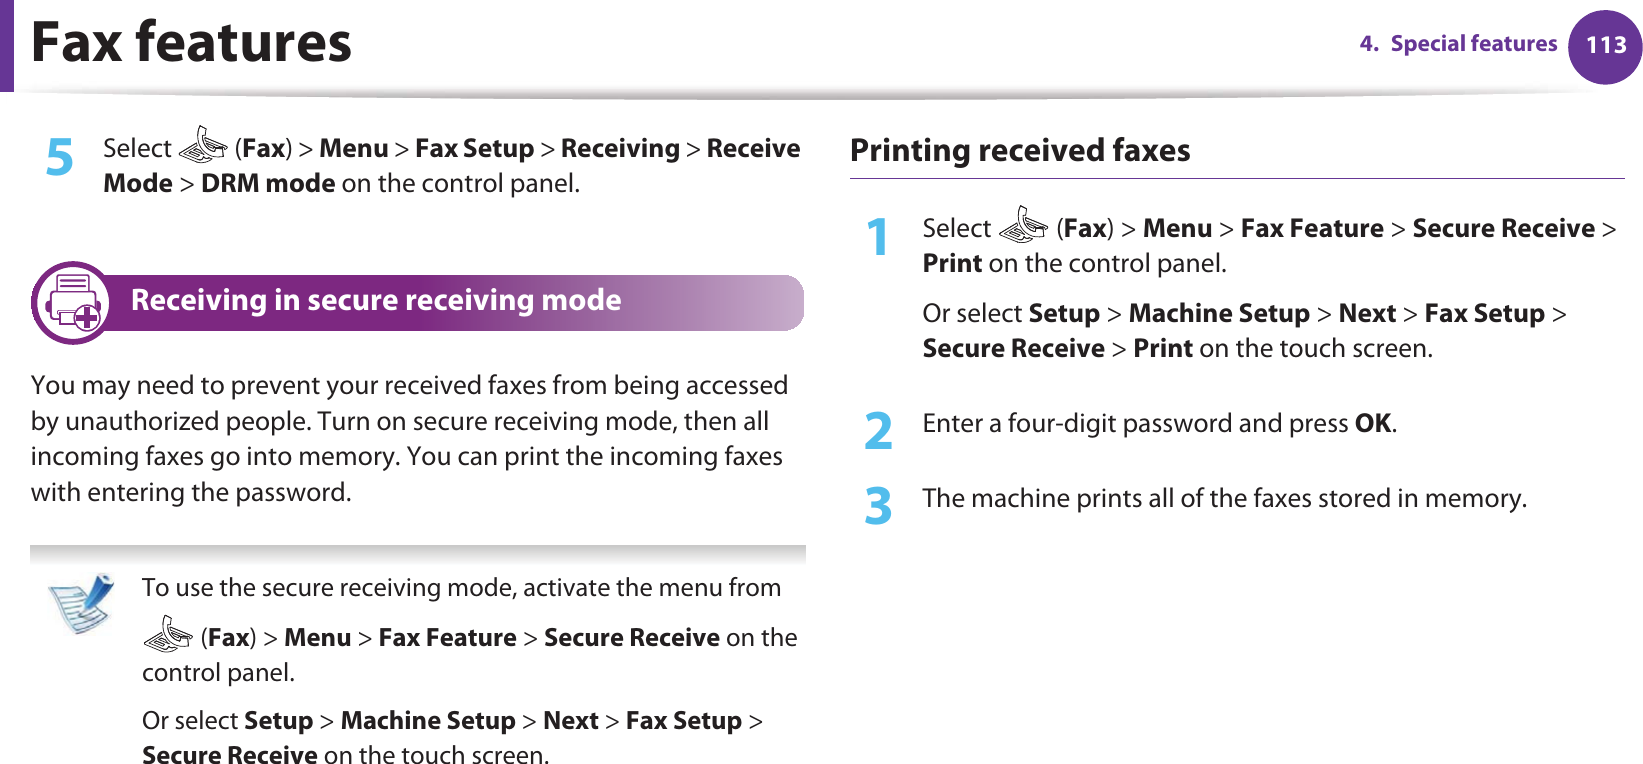 Fax features 1134. Special features5  Select  (Fax) &gt; Menu &gt; Fax Setup &gt; Receiving &gt; Receive Mode &gt; DRM mode on the control panel. 23 Receiving in secure receiving modeYou may need to prevent your received faxes from being accessed by unauthorized people. Turn on secure receiving mode, then all incoming faxes go into memory. You can print the incoming faxes with entering the password.  To use the secure receiving mode, activate the menu from  (Fax) &gt; Menu &gt; Fax Feature &gt; Secure Receive on the control panel. Or select Setup &gt; Machine Setup &gt; Next &gt; Fax Setup &gt; Secure Receive on the touch screen. Printing received faxes1Select  (Fax) &gt; Menu &gt; Fax Feature &gt; Secure Receive &gt; Print on the control panel. Or select Setup &gt; Machine Setup &gt; Next &gt; Fax Setup &gt; Secure Receive &gt; Print on the touch screen.2  Enter a four-digit password and press OK. 3  The machine prints all of the faxes stored in memory.